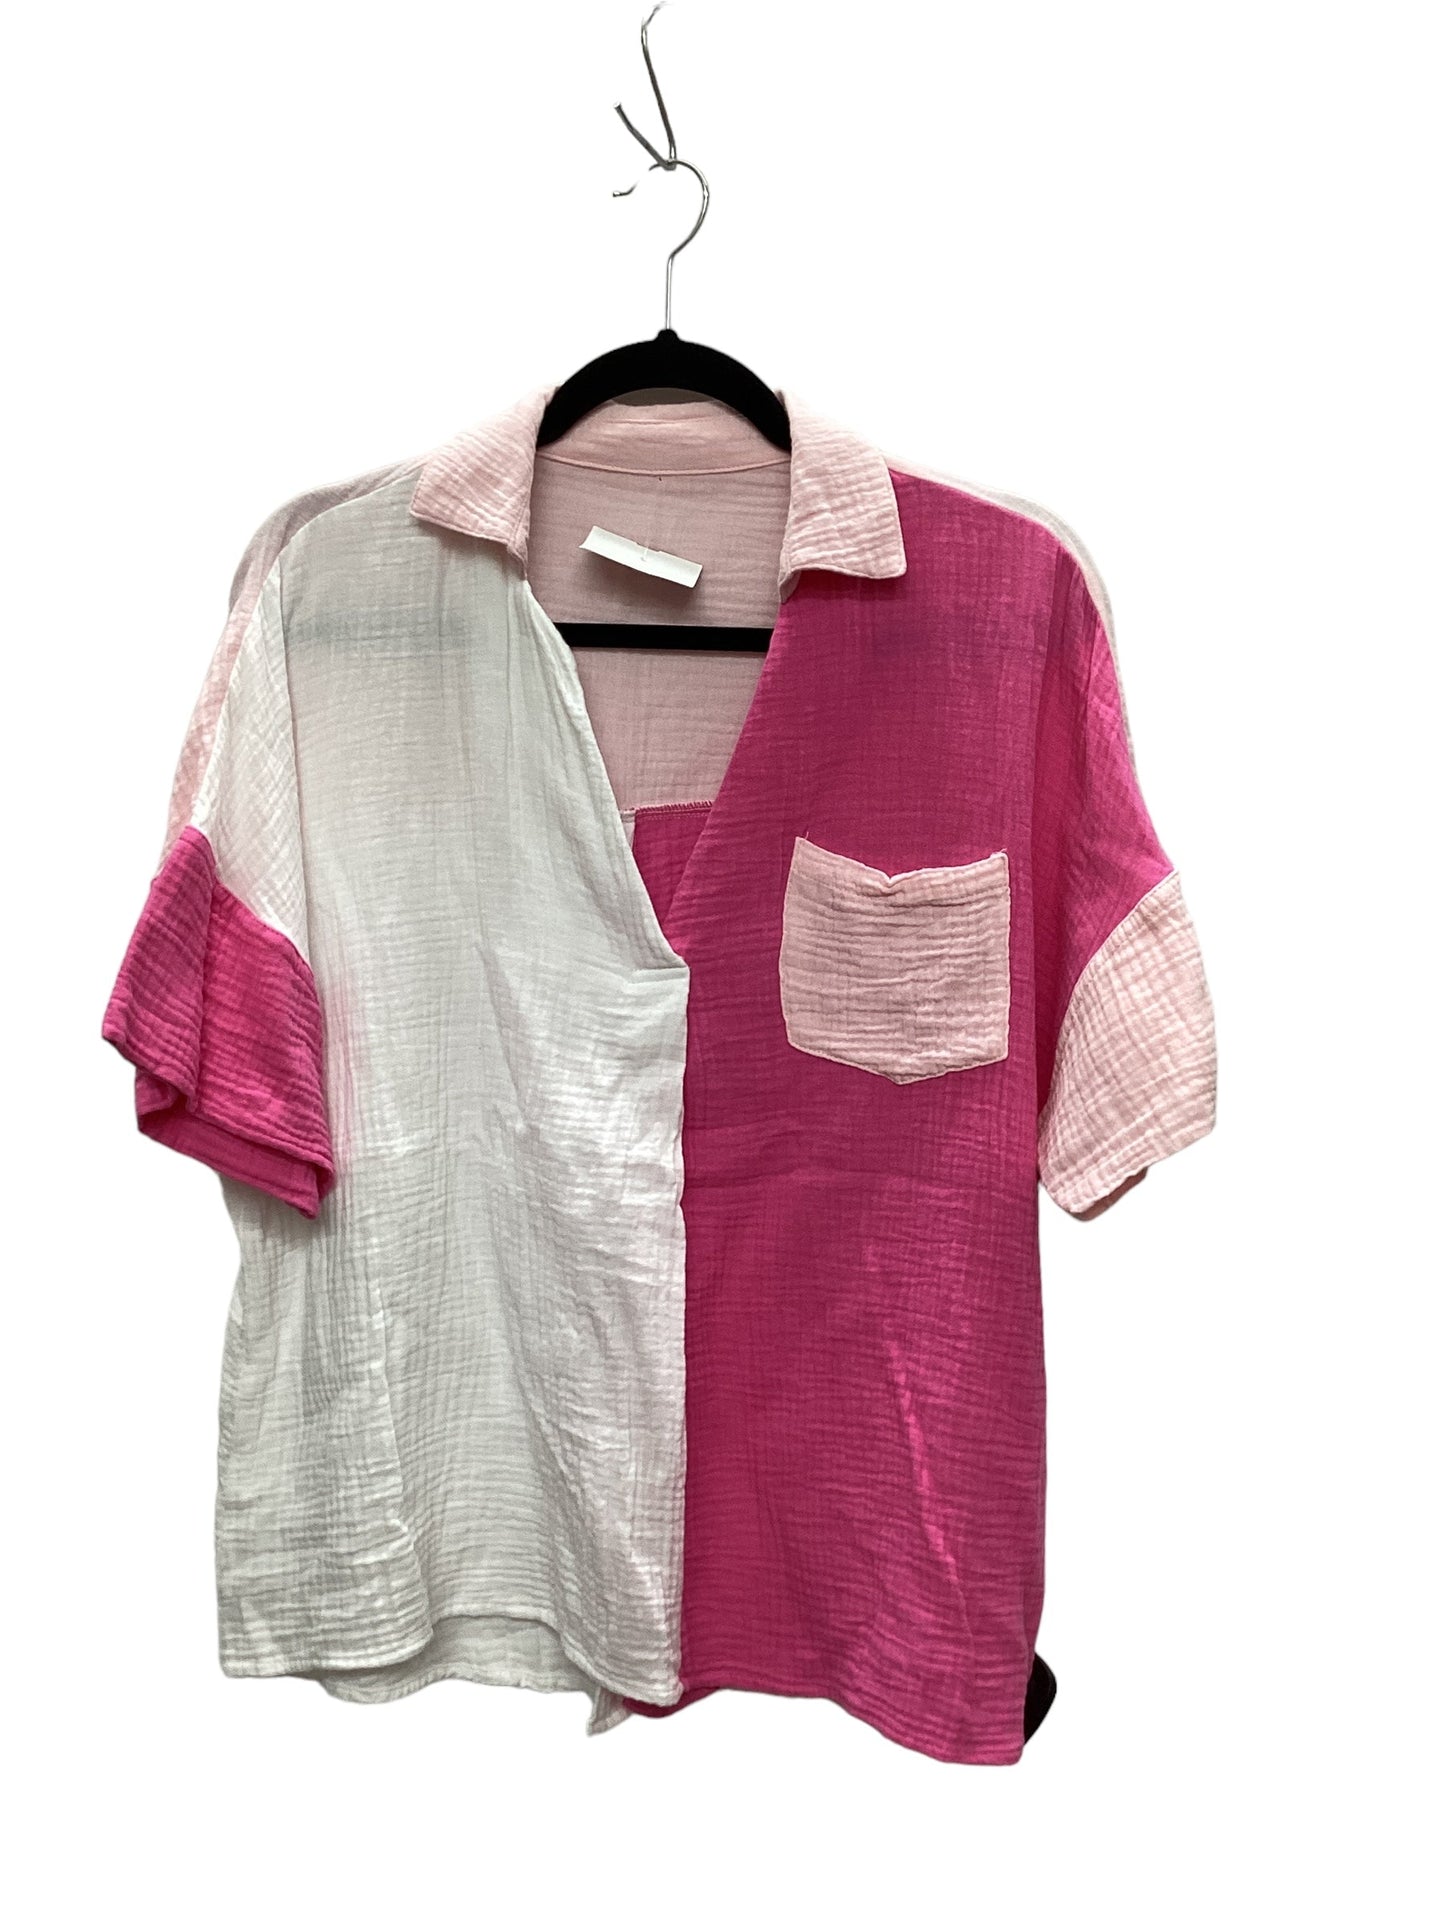 Pink Top Short Sleeve Shein, Size M